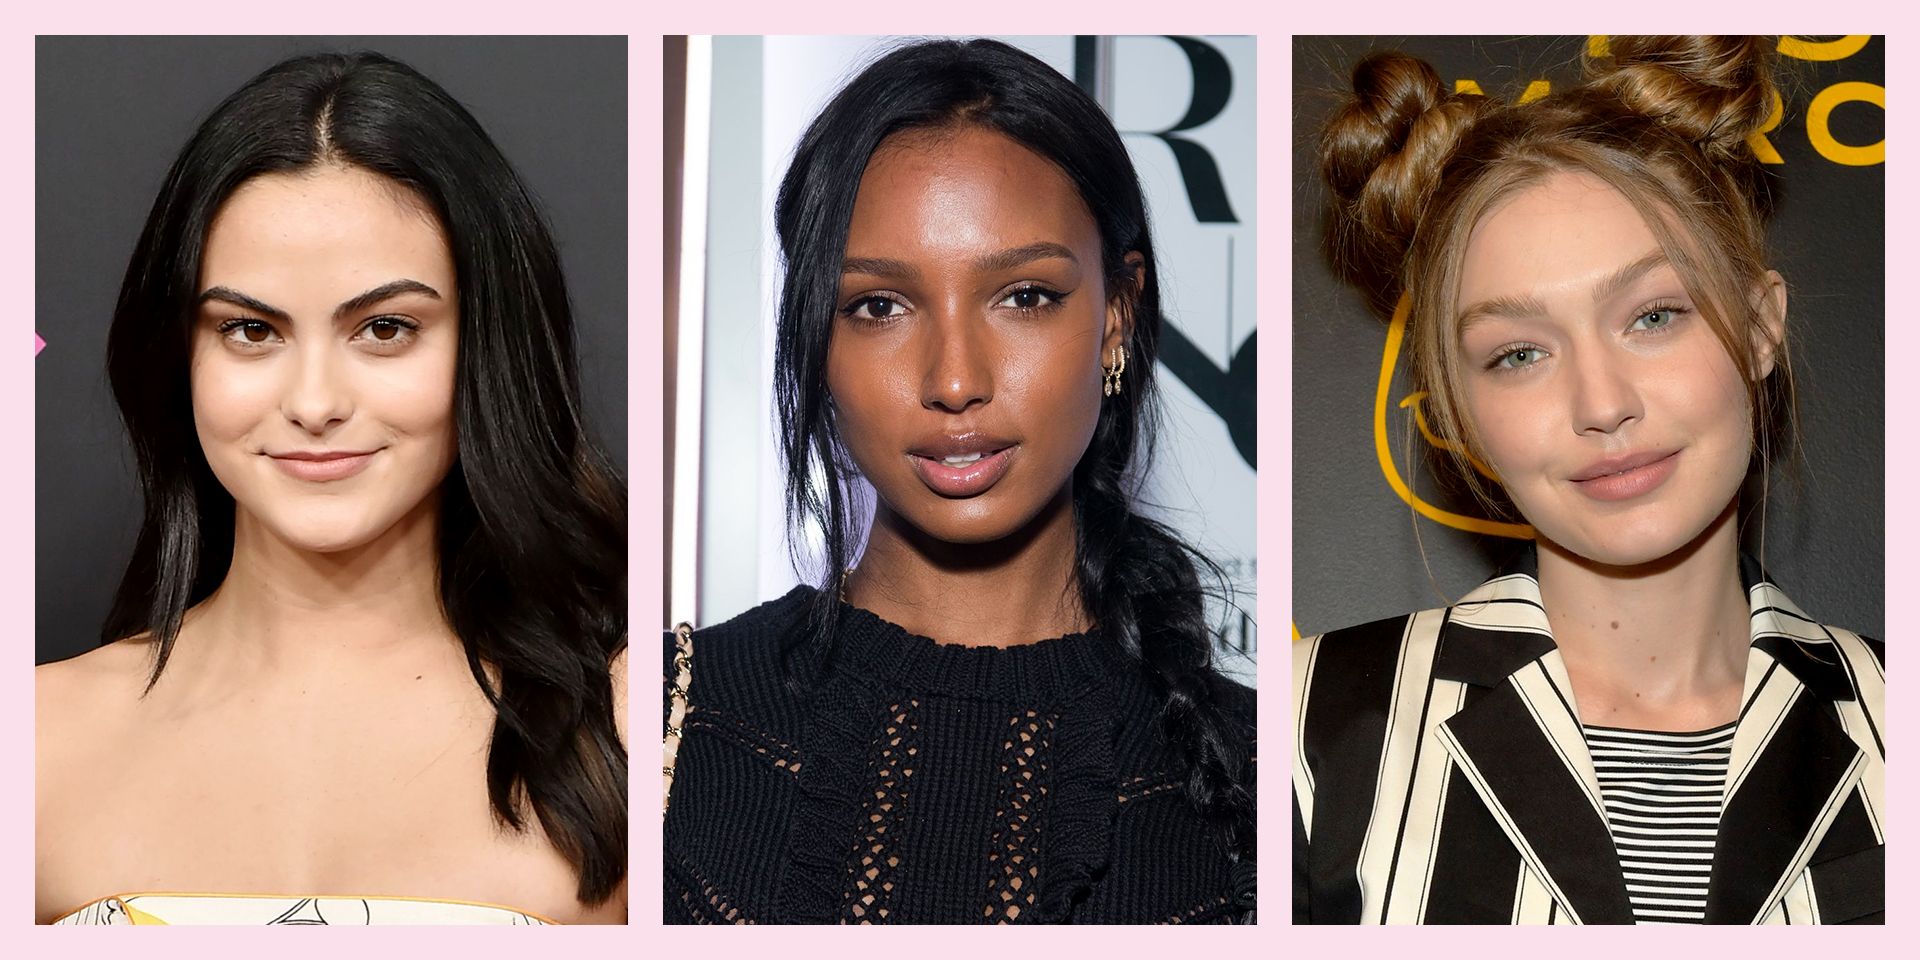 24 Neckline Hairstyle Ideas with a Guide on How to Wear Your Hair with  Dresses